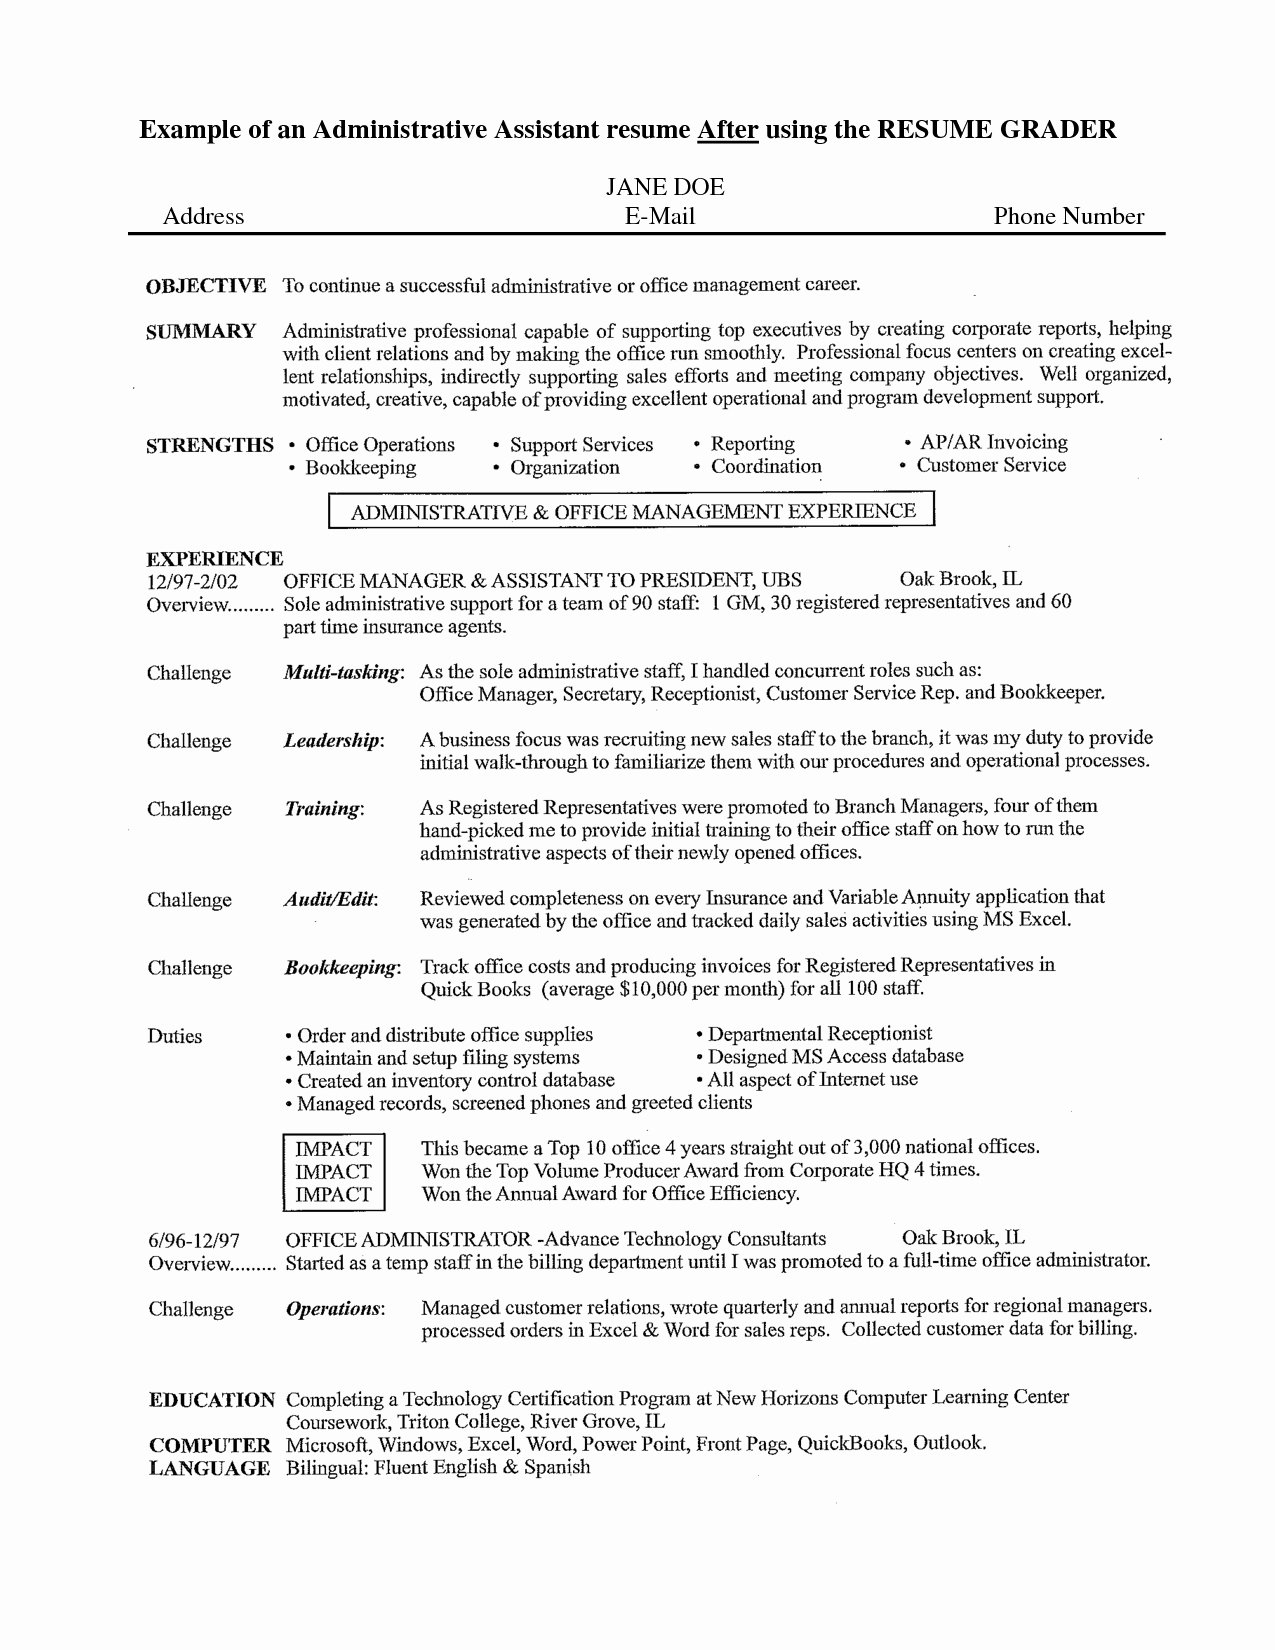 Resume Summary for Administrative assistant Resume Ideas